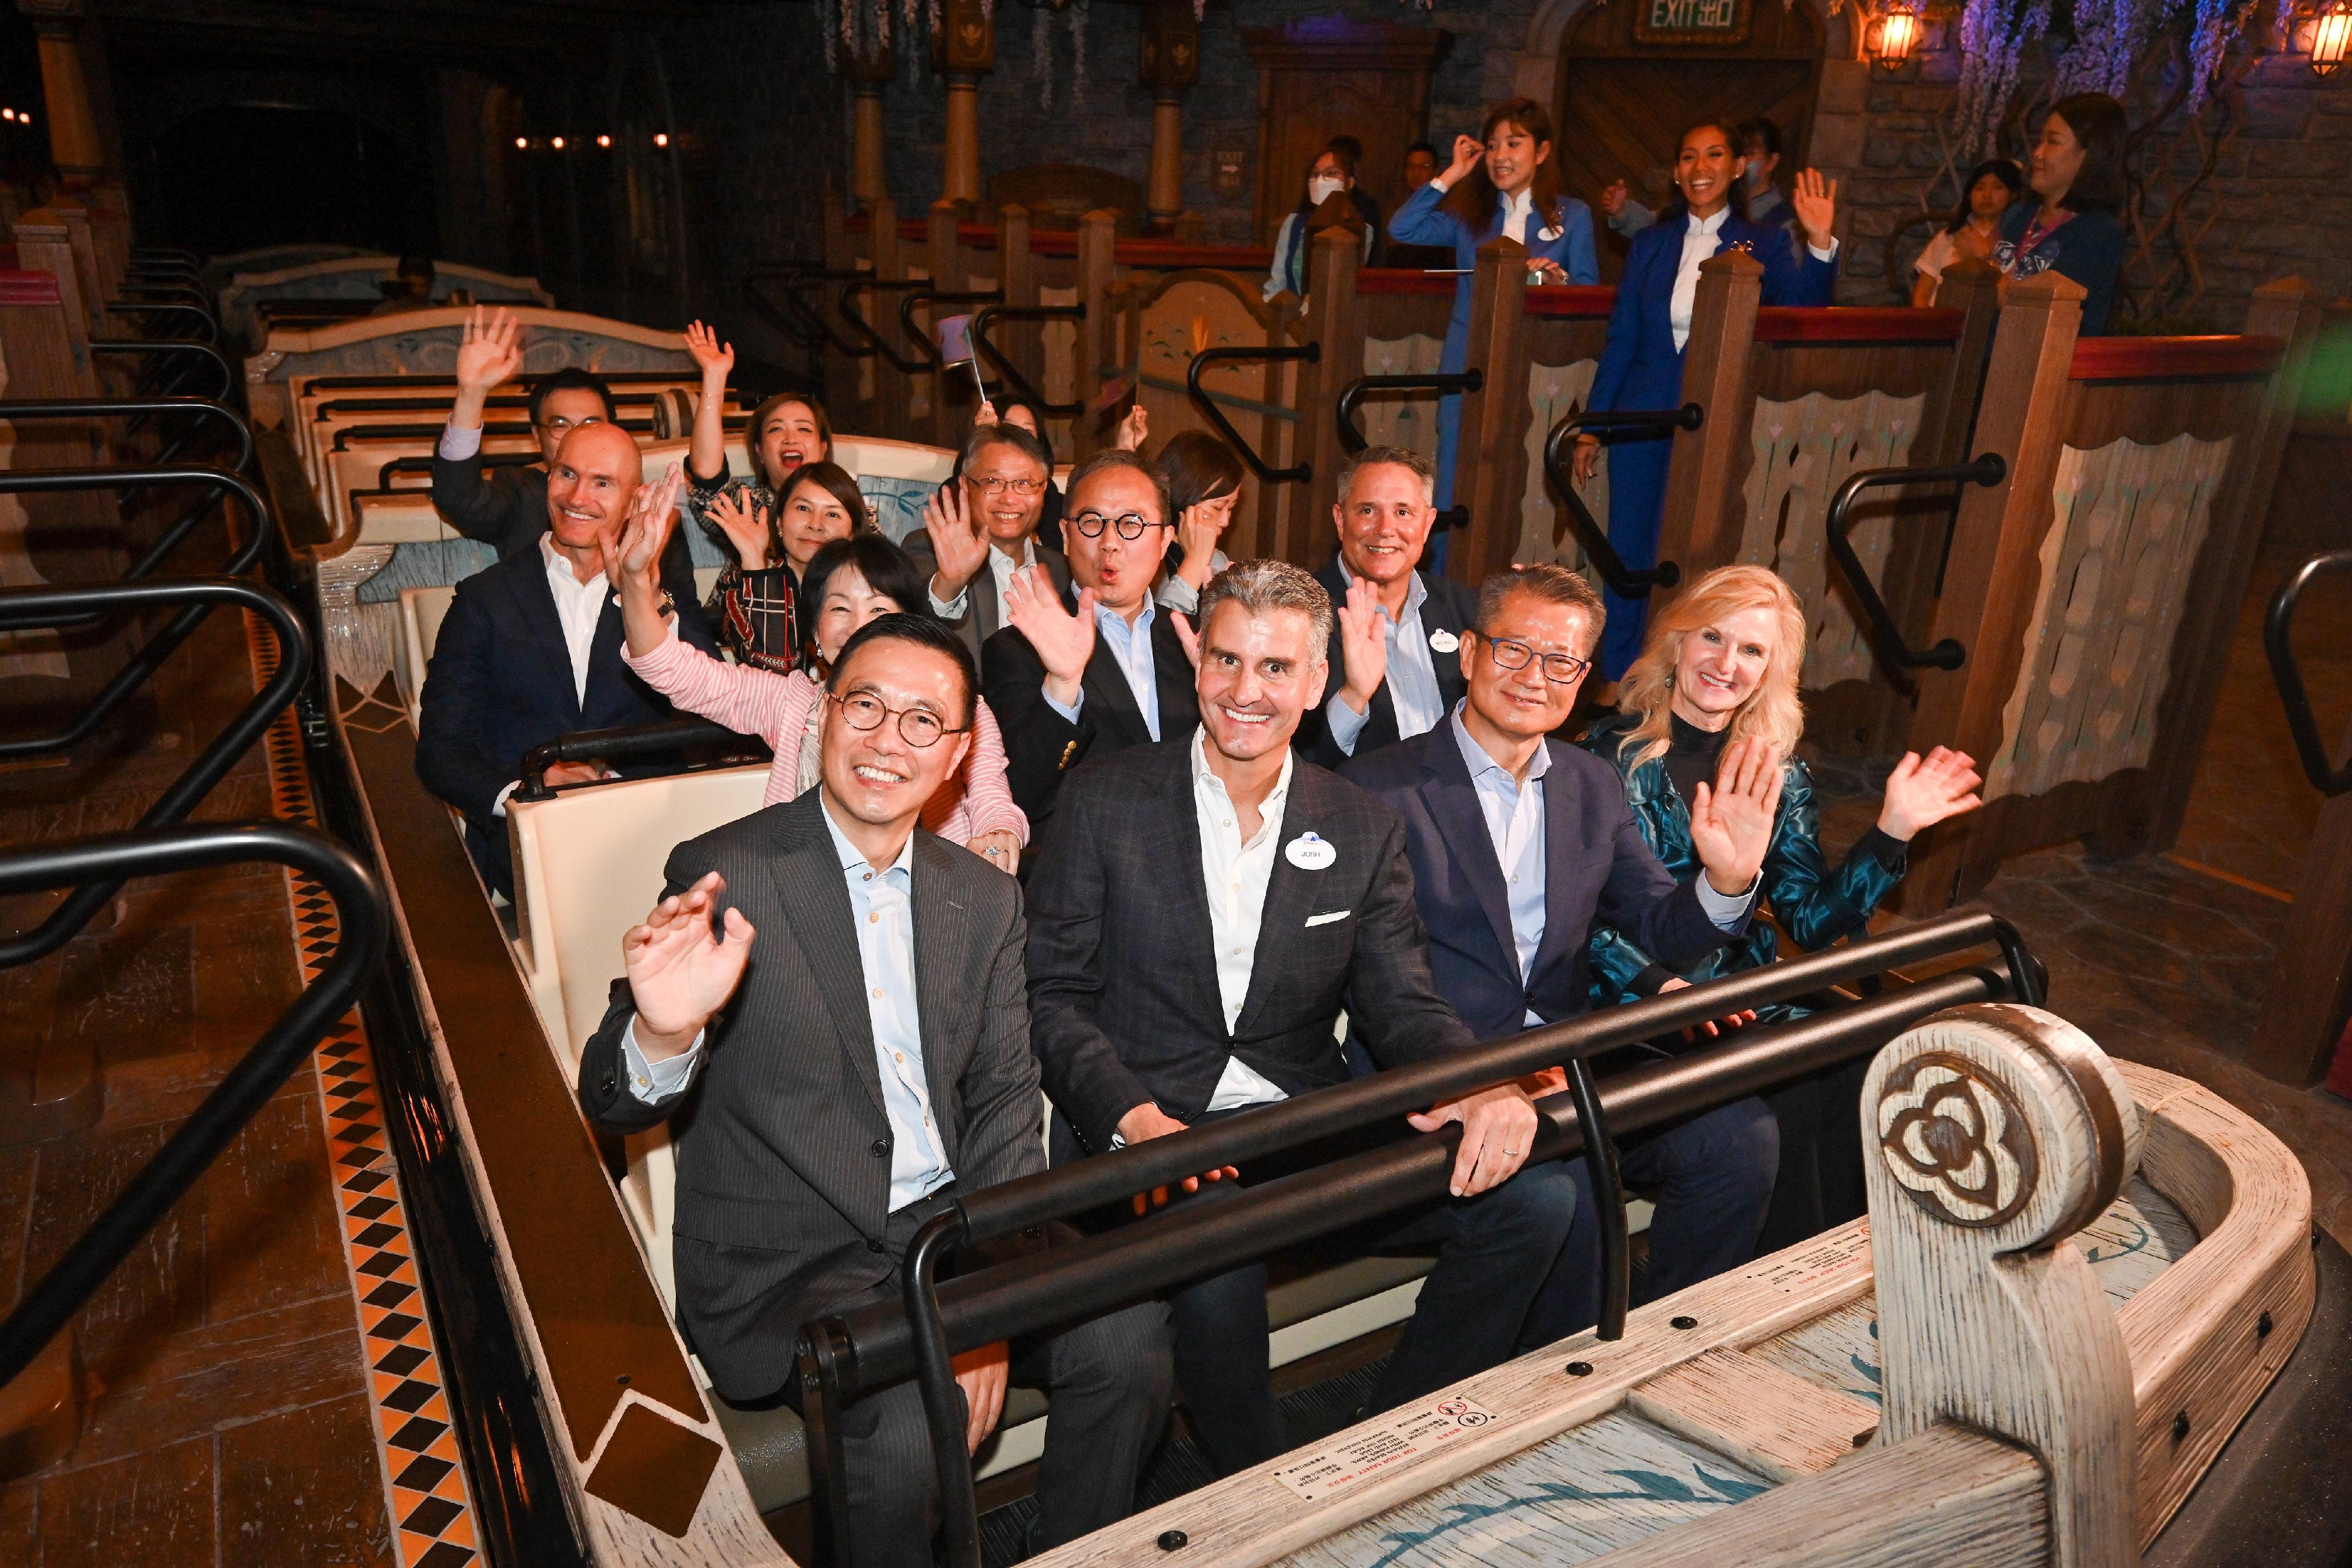 The Financial Secretary, Mr Paul Chan, attended the Hong Kong Disneyland Resort "A Welcome Ceremony for World of Frozen" today (November 20). Photo shows (first row, from left) the Secretary for Culture, Sports and Tourism, Mr Kevin Yeung; the Chairman of Disney Parks, Experiences and Products of the Walt Disney Company, Mr Josh D'Amaro; Mr Chan, and the President and Managing Director of Disney Parks International of the Walt Disney Company, Ms Jill Estorino, enjoying a ride at the Hong Kong Disneyland Resort.

